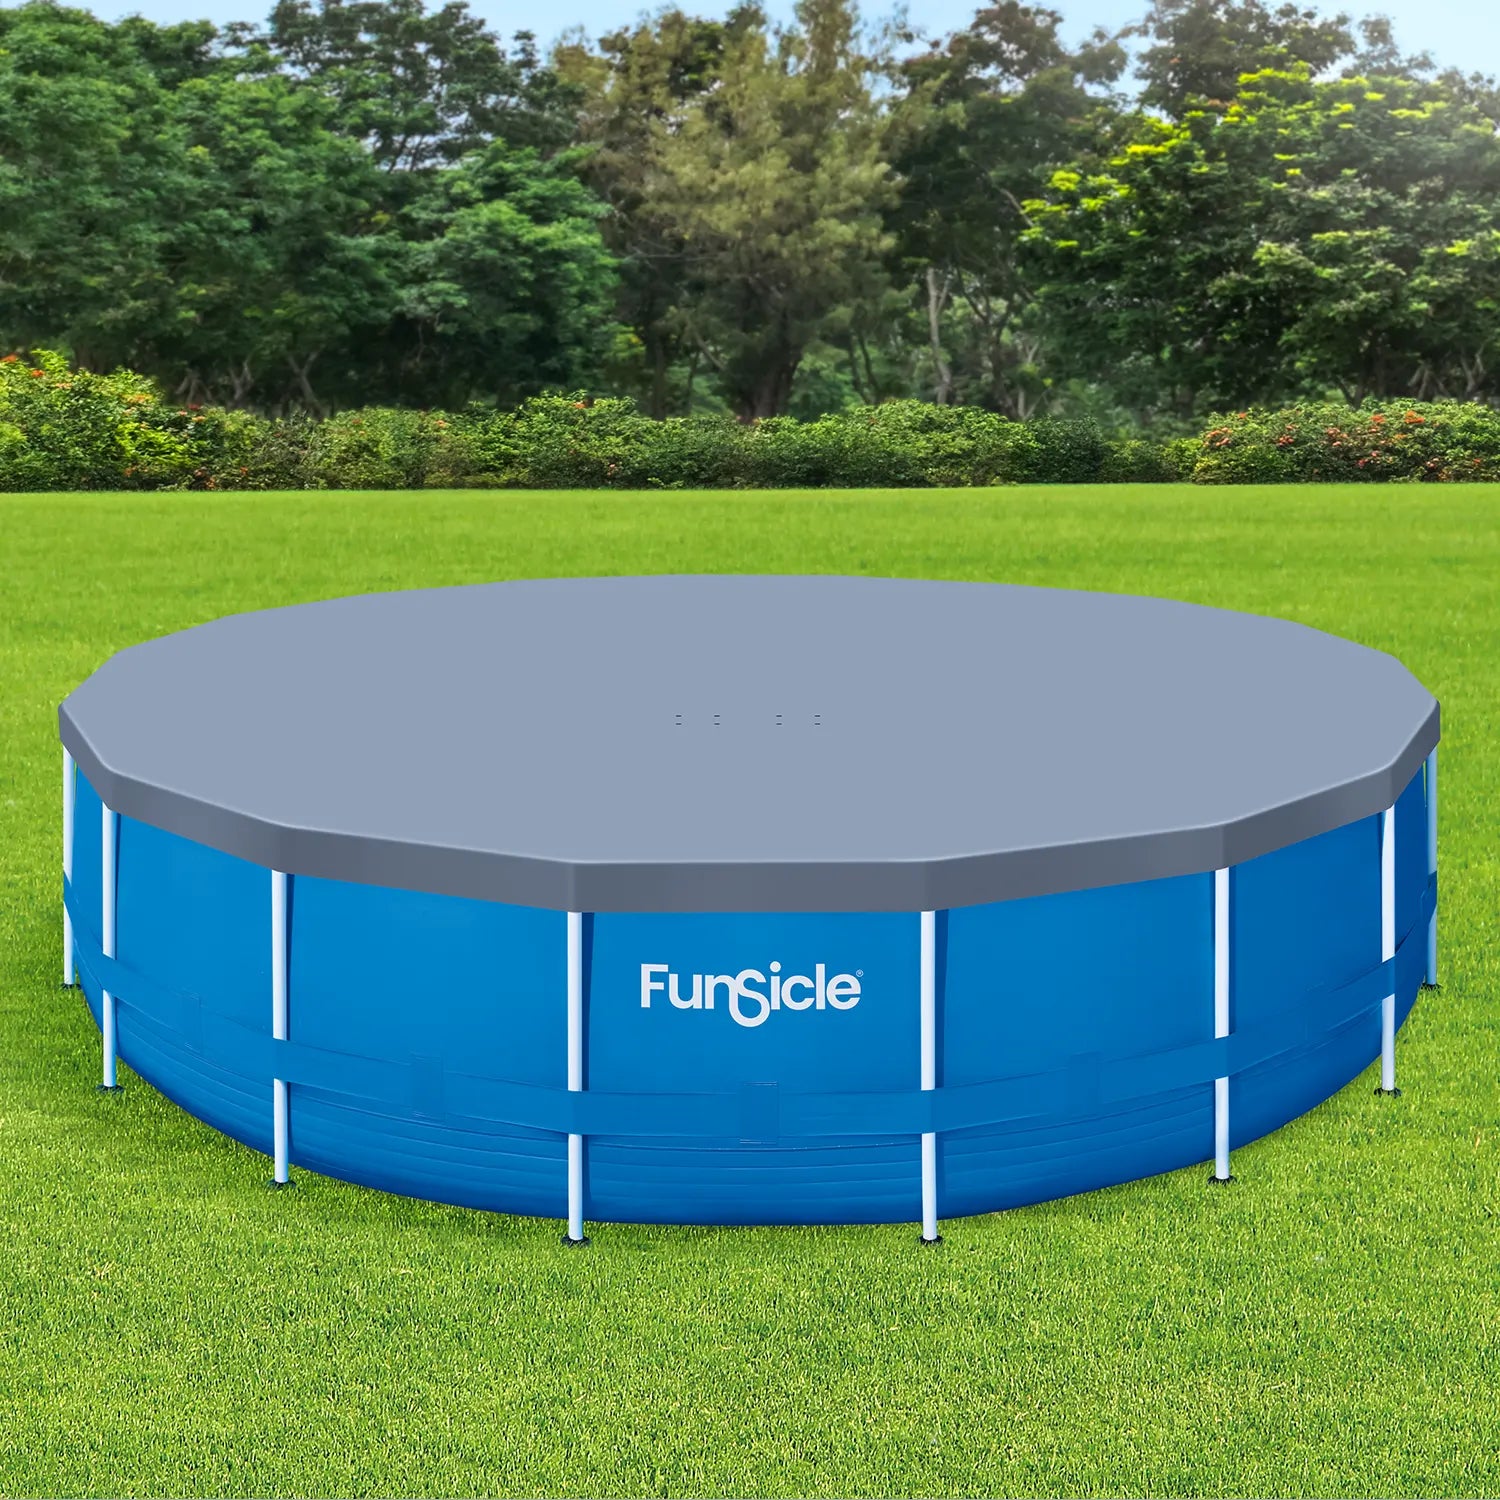 Funsicle 18ft Frame Pool Cover on grass background